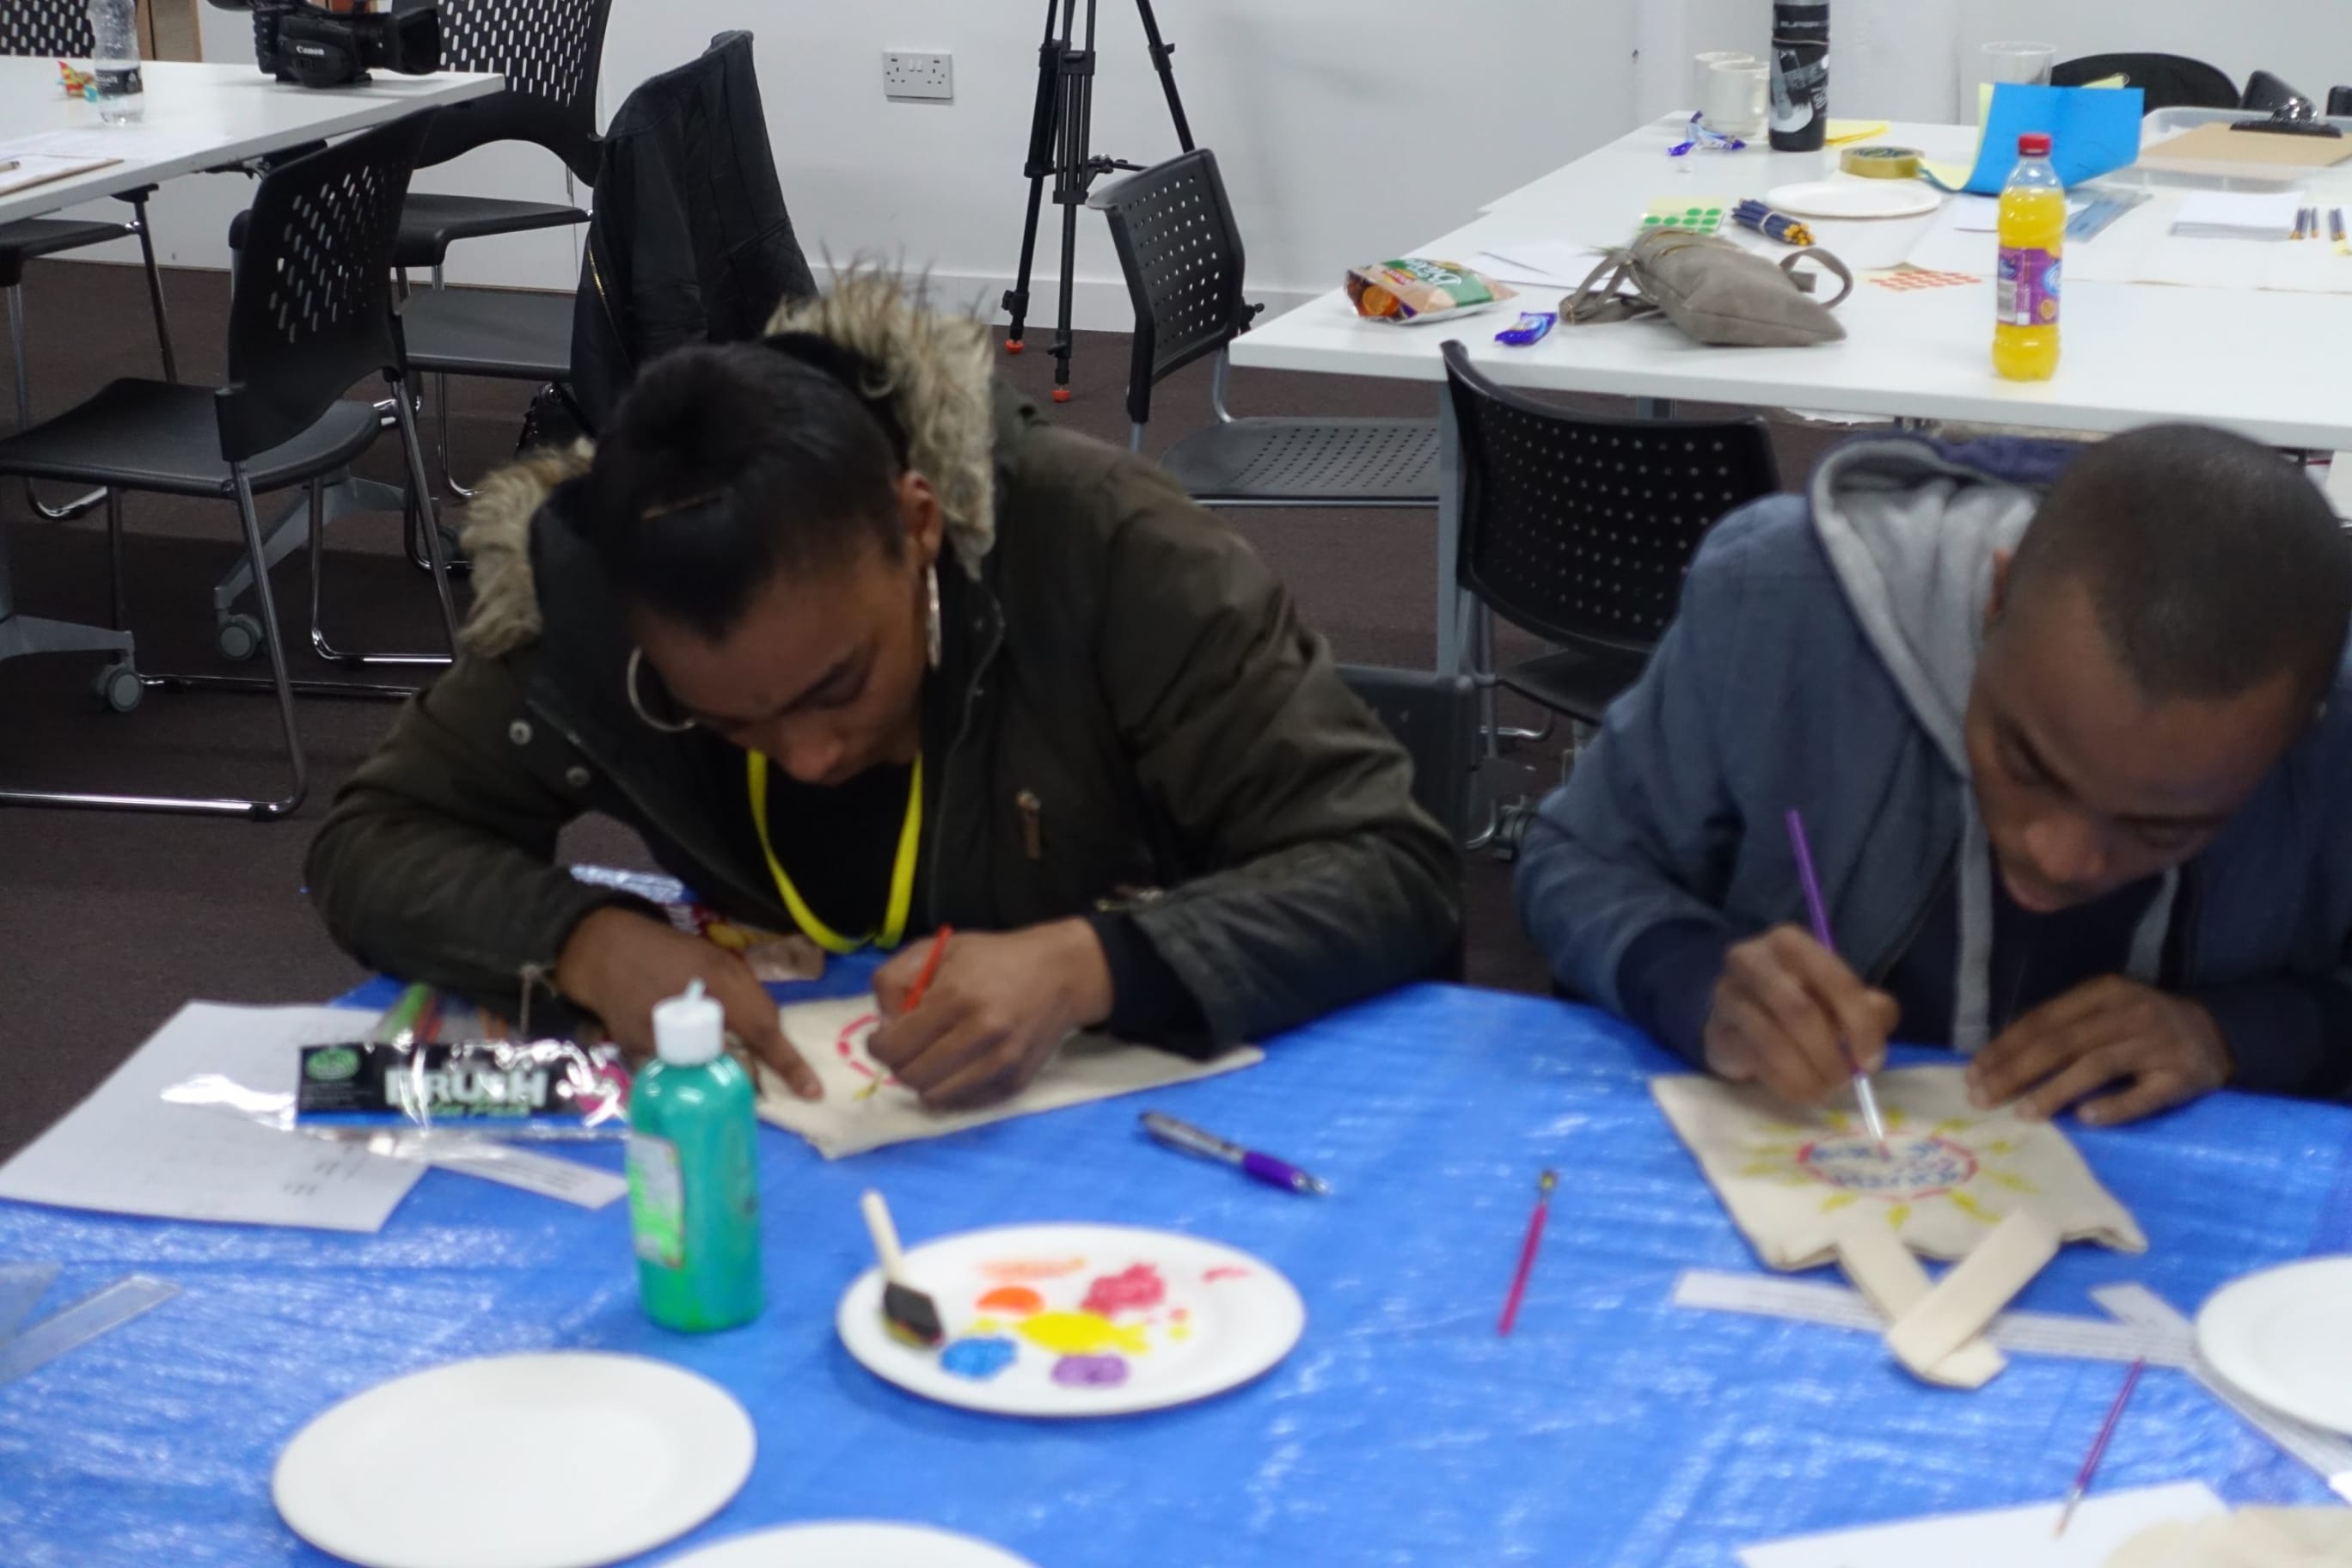 Youth Action participants painting